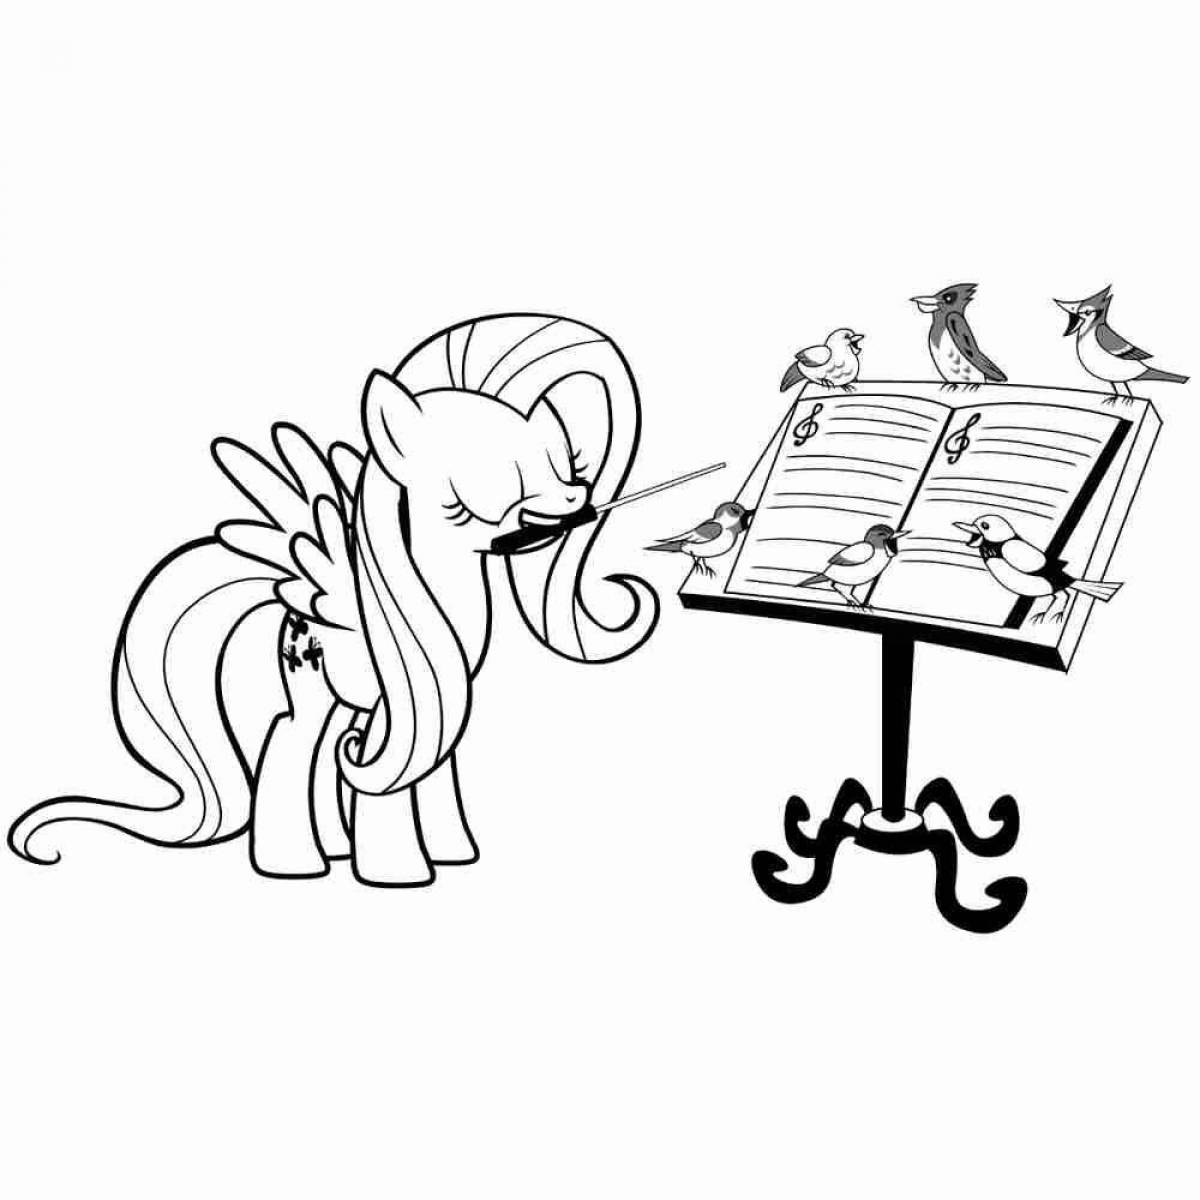 Coloring page charming fluttershy pony